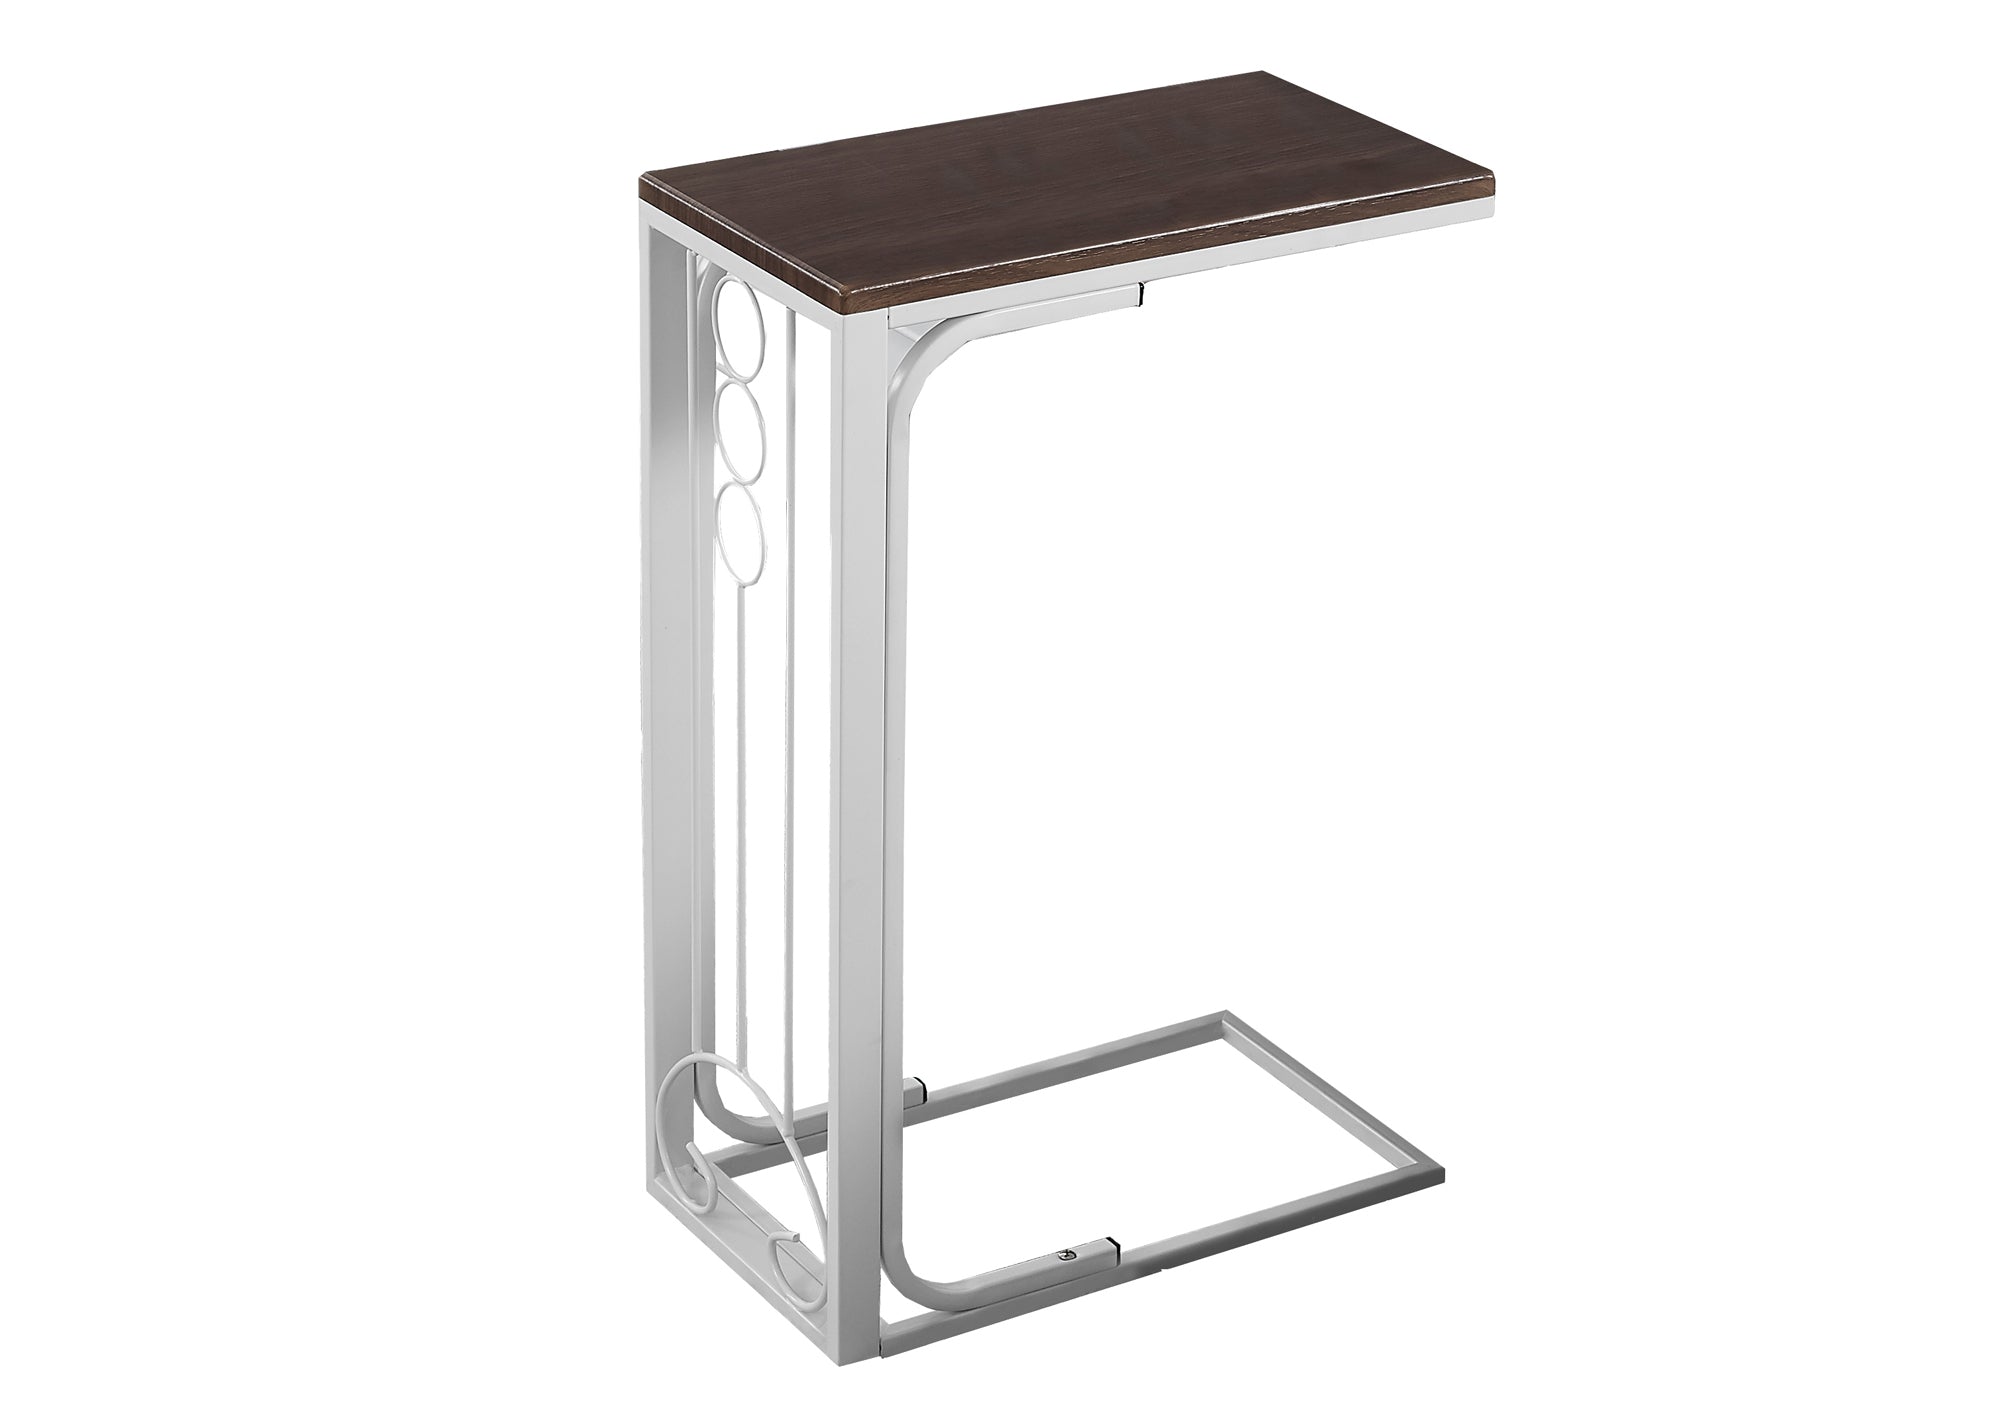 MN-413136    Accent Table, C-Shaped, End, Side, Snack, Living Room, Bedroom, Metal Legs, Laminate, Cherry, Silver, Contemporary, Modern